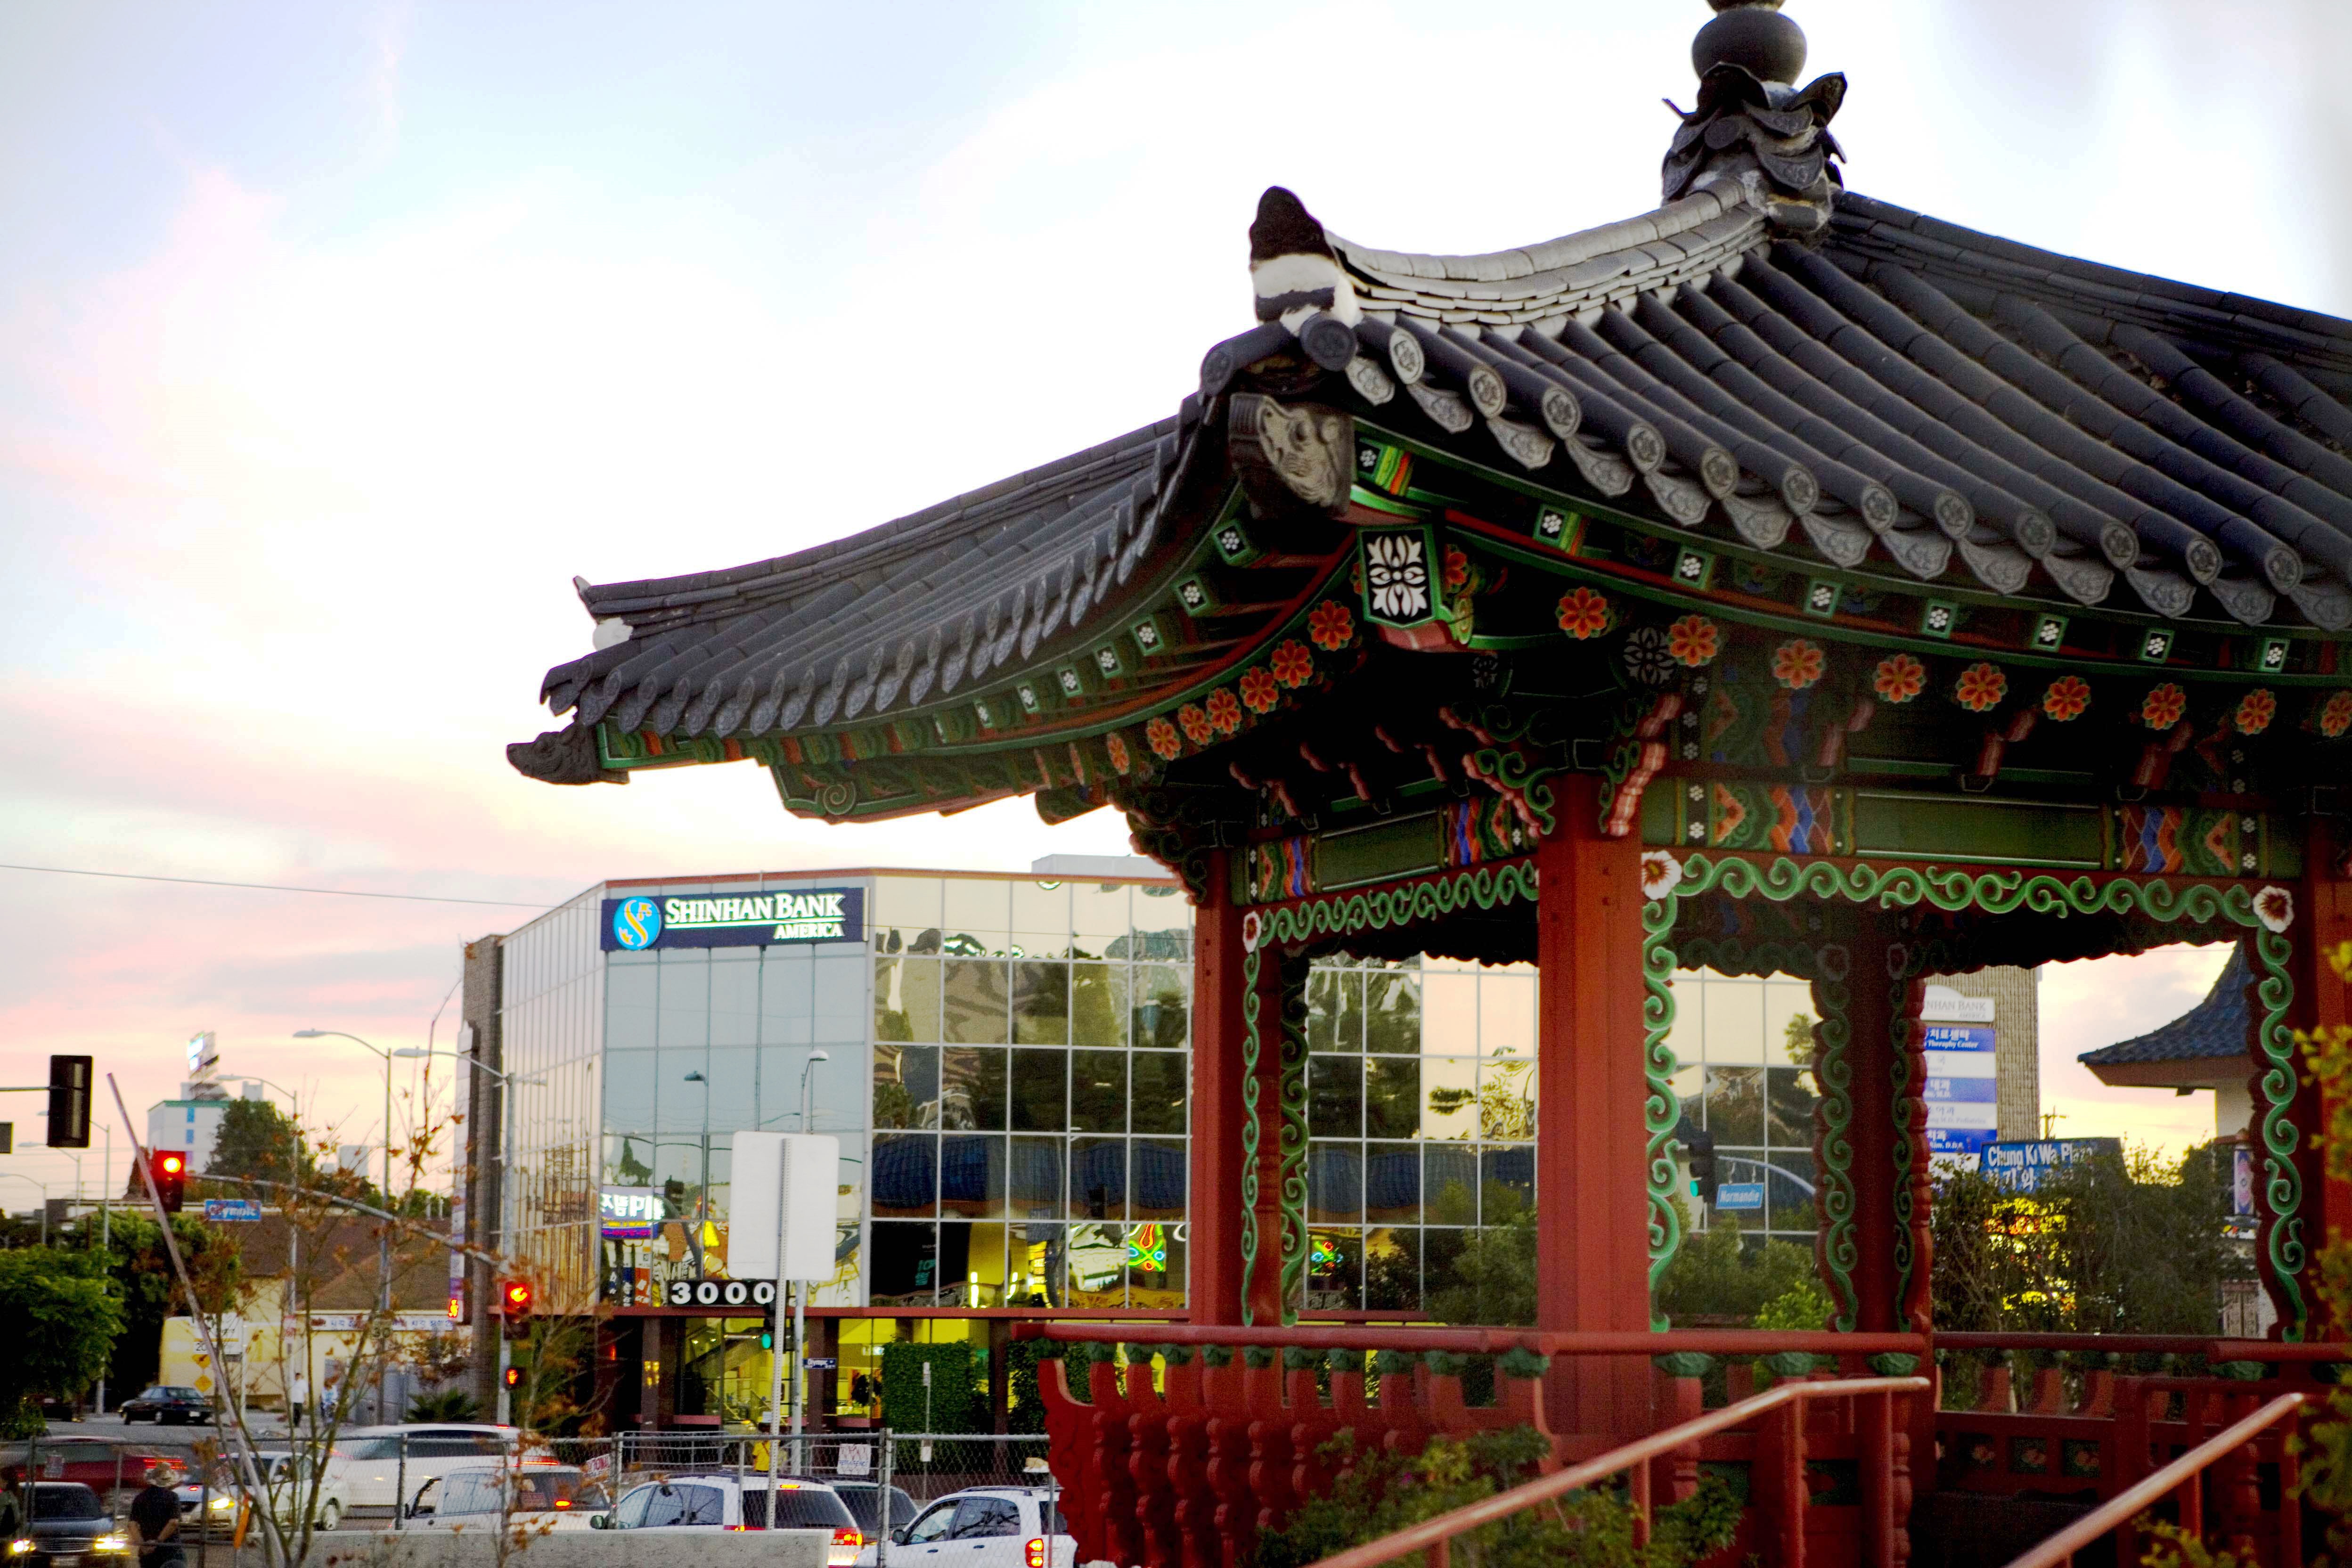 The Koreatown Pavilion Garden, Da Wool Jung,  is Koreatown's gateway monument symbolizing the cultural, economic, and political growth of the Korean American community.